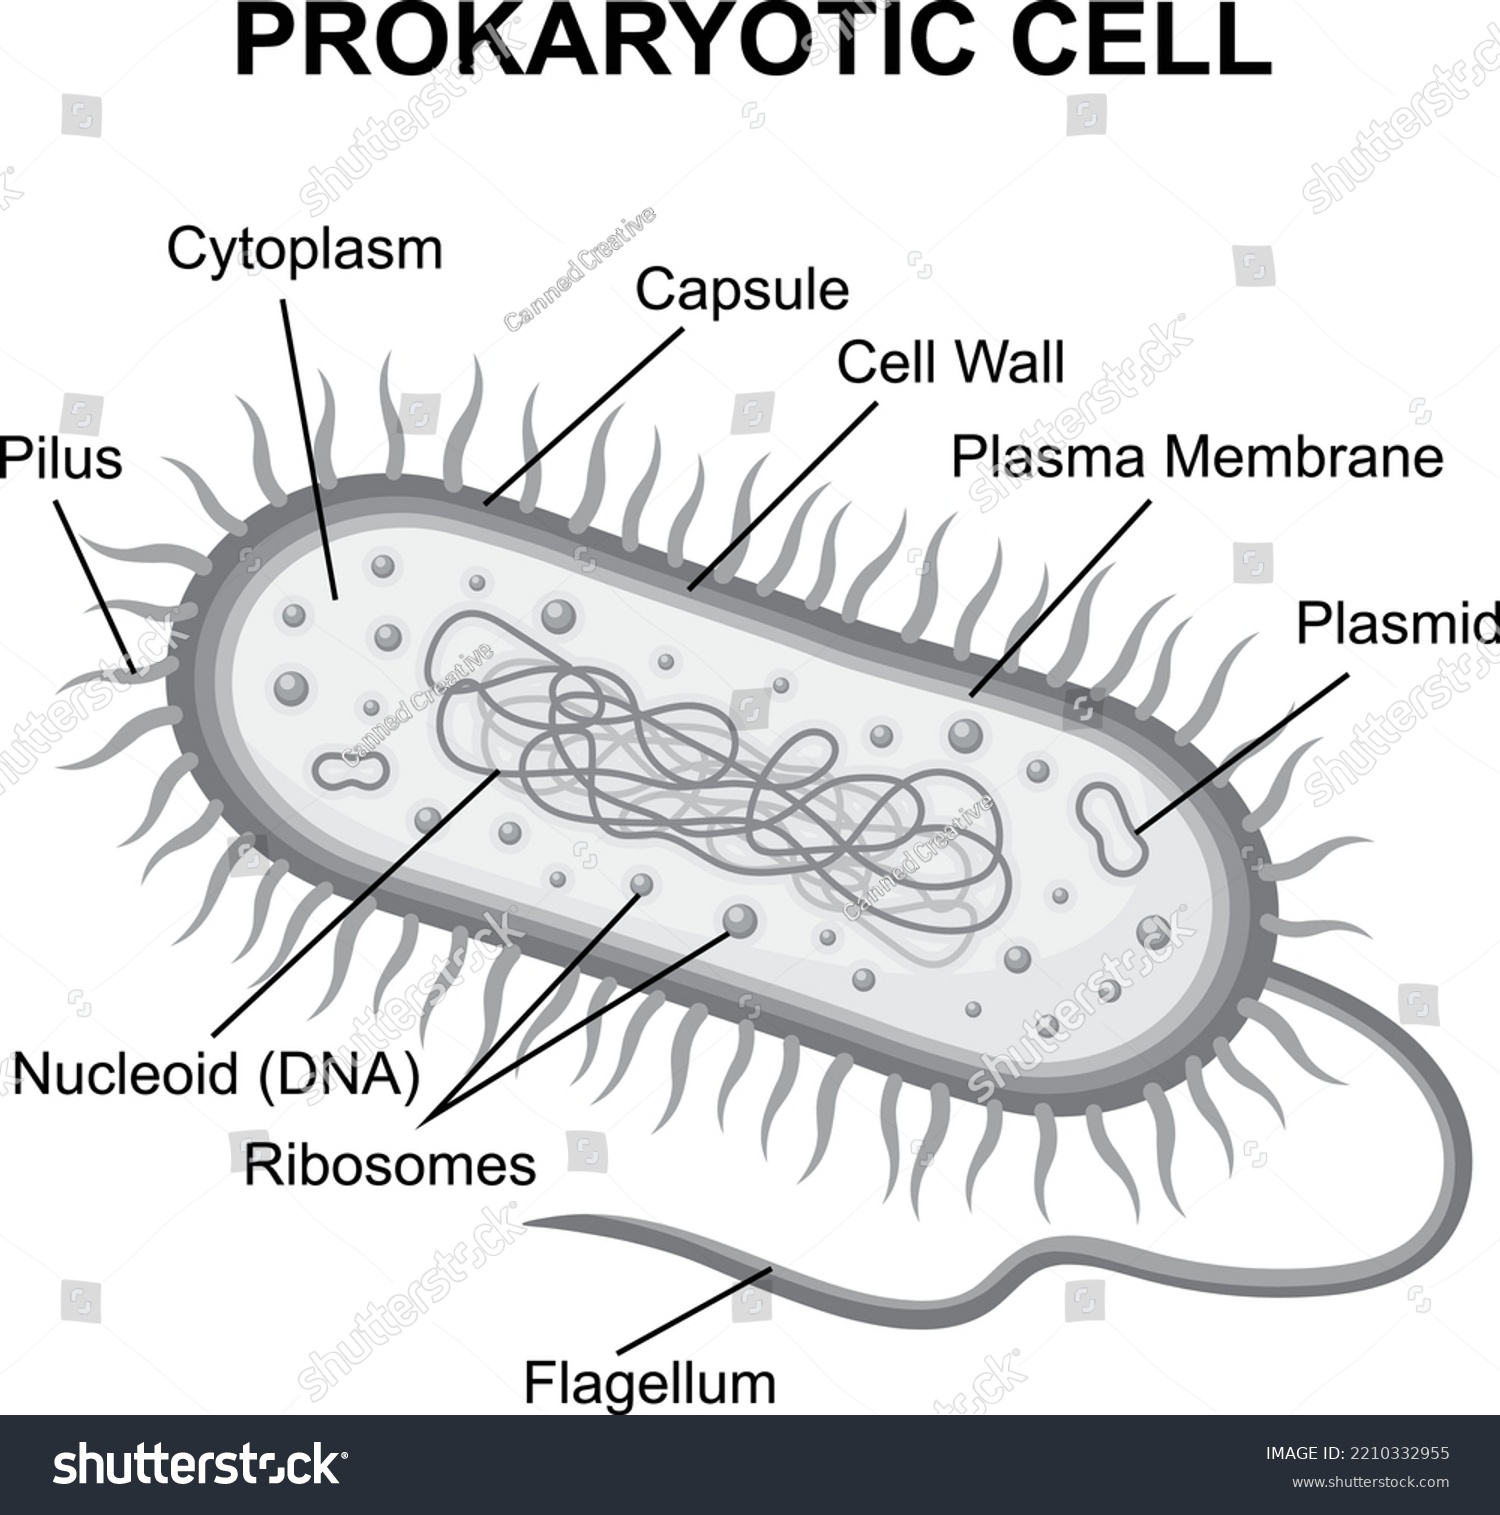 Prokaryotic Cell Structure Diagram Cross Section Stock Vector Royalty Free 2210332955 1568